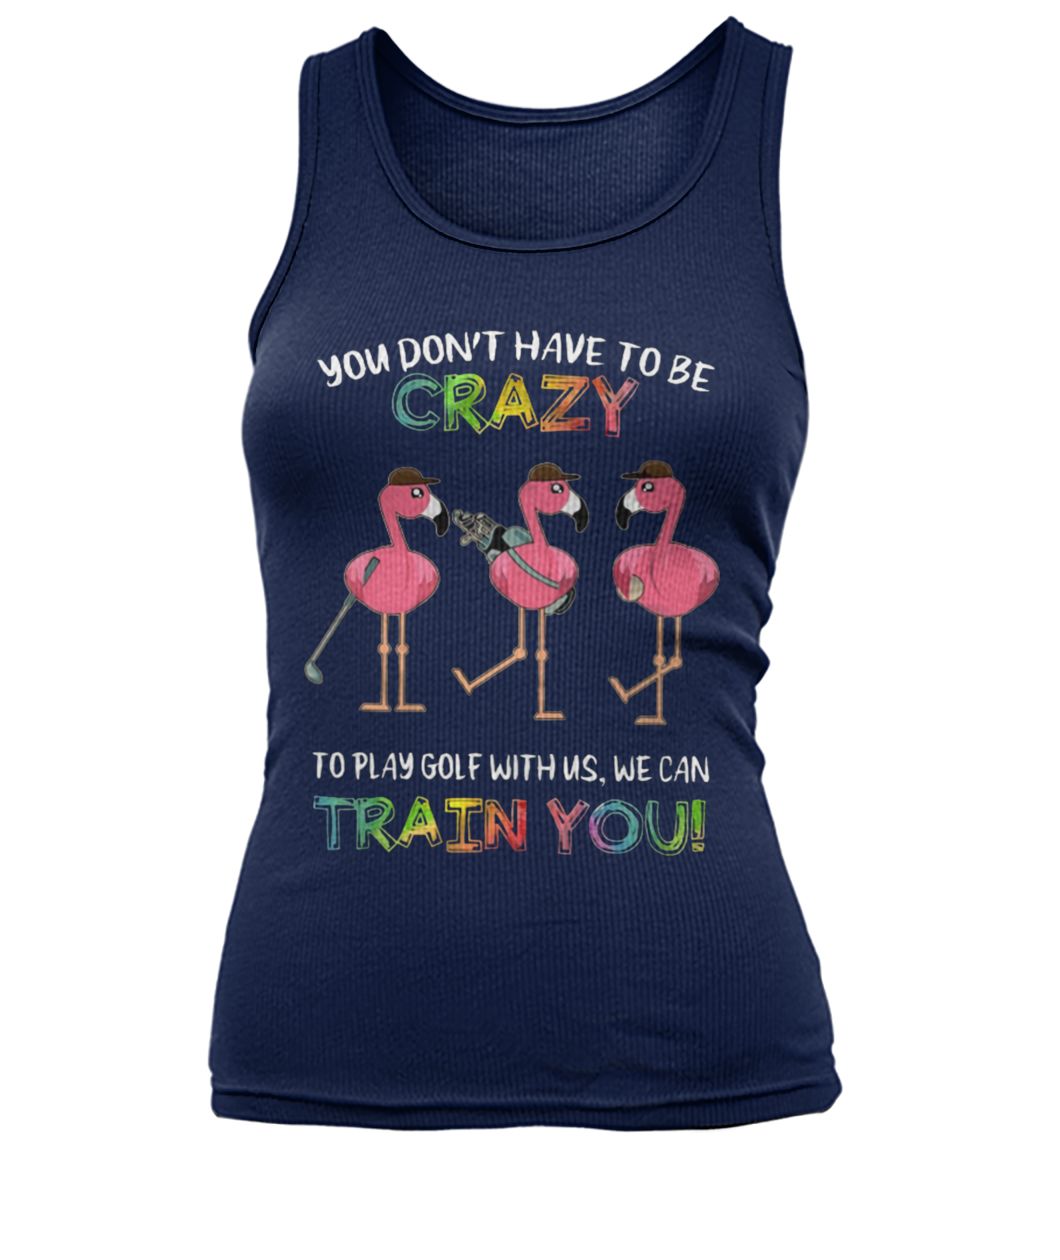 Flamingo you don’t have to be crazy to play golf with us we can train you women's tank top